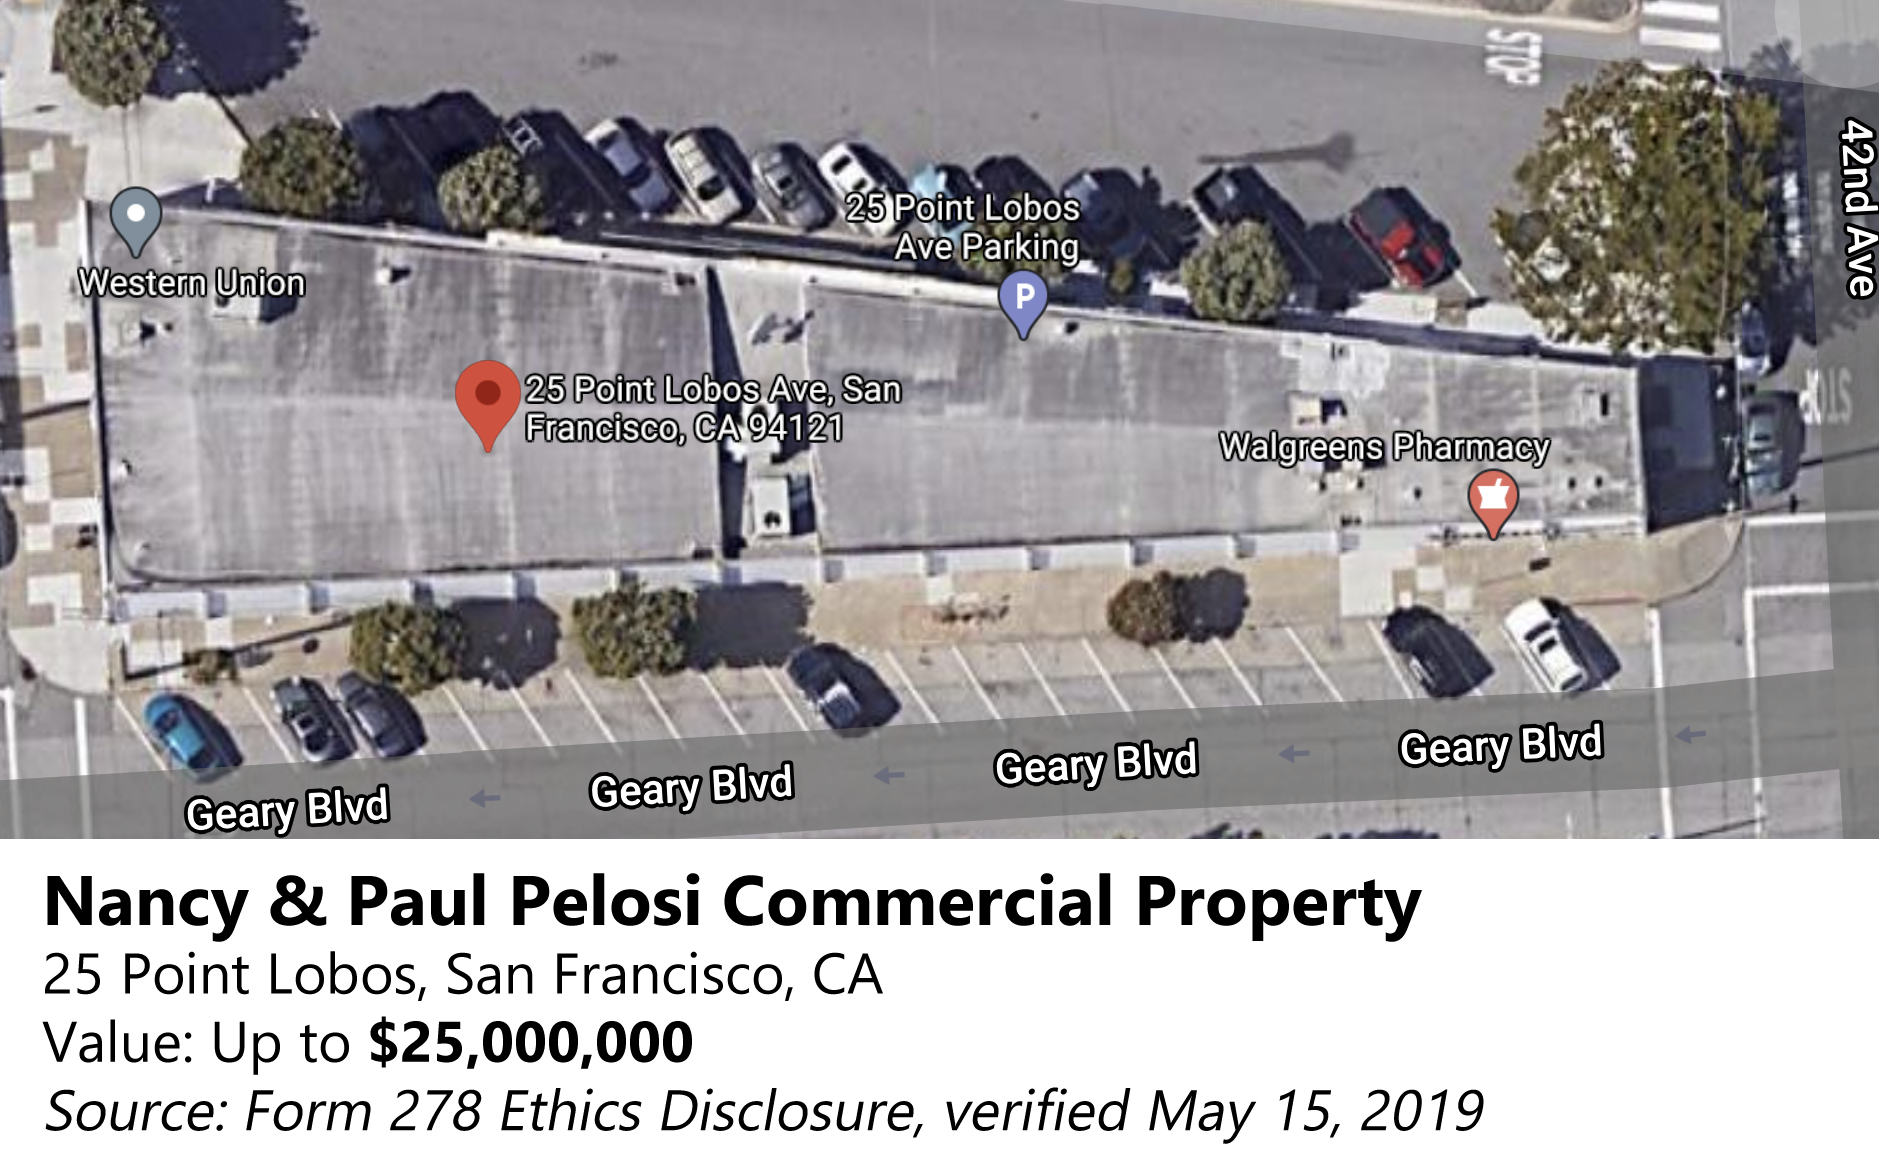 Nancy & Paul Pelosi Commercial Property
25 Point Lobos, San Francisco, CA, Value: Up to $25,000,000, Source: Form 278 Ethics Disclosure, verified May 15, 2019